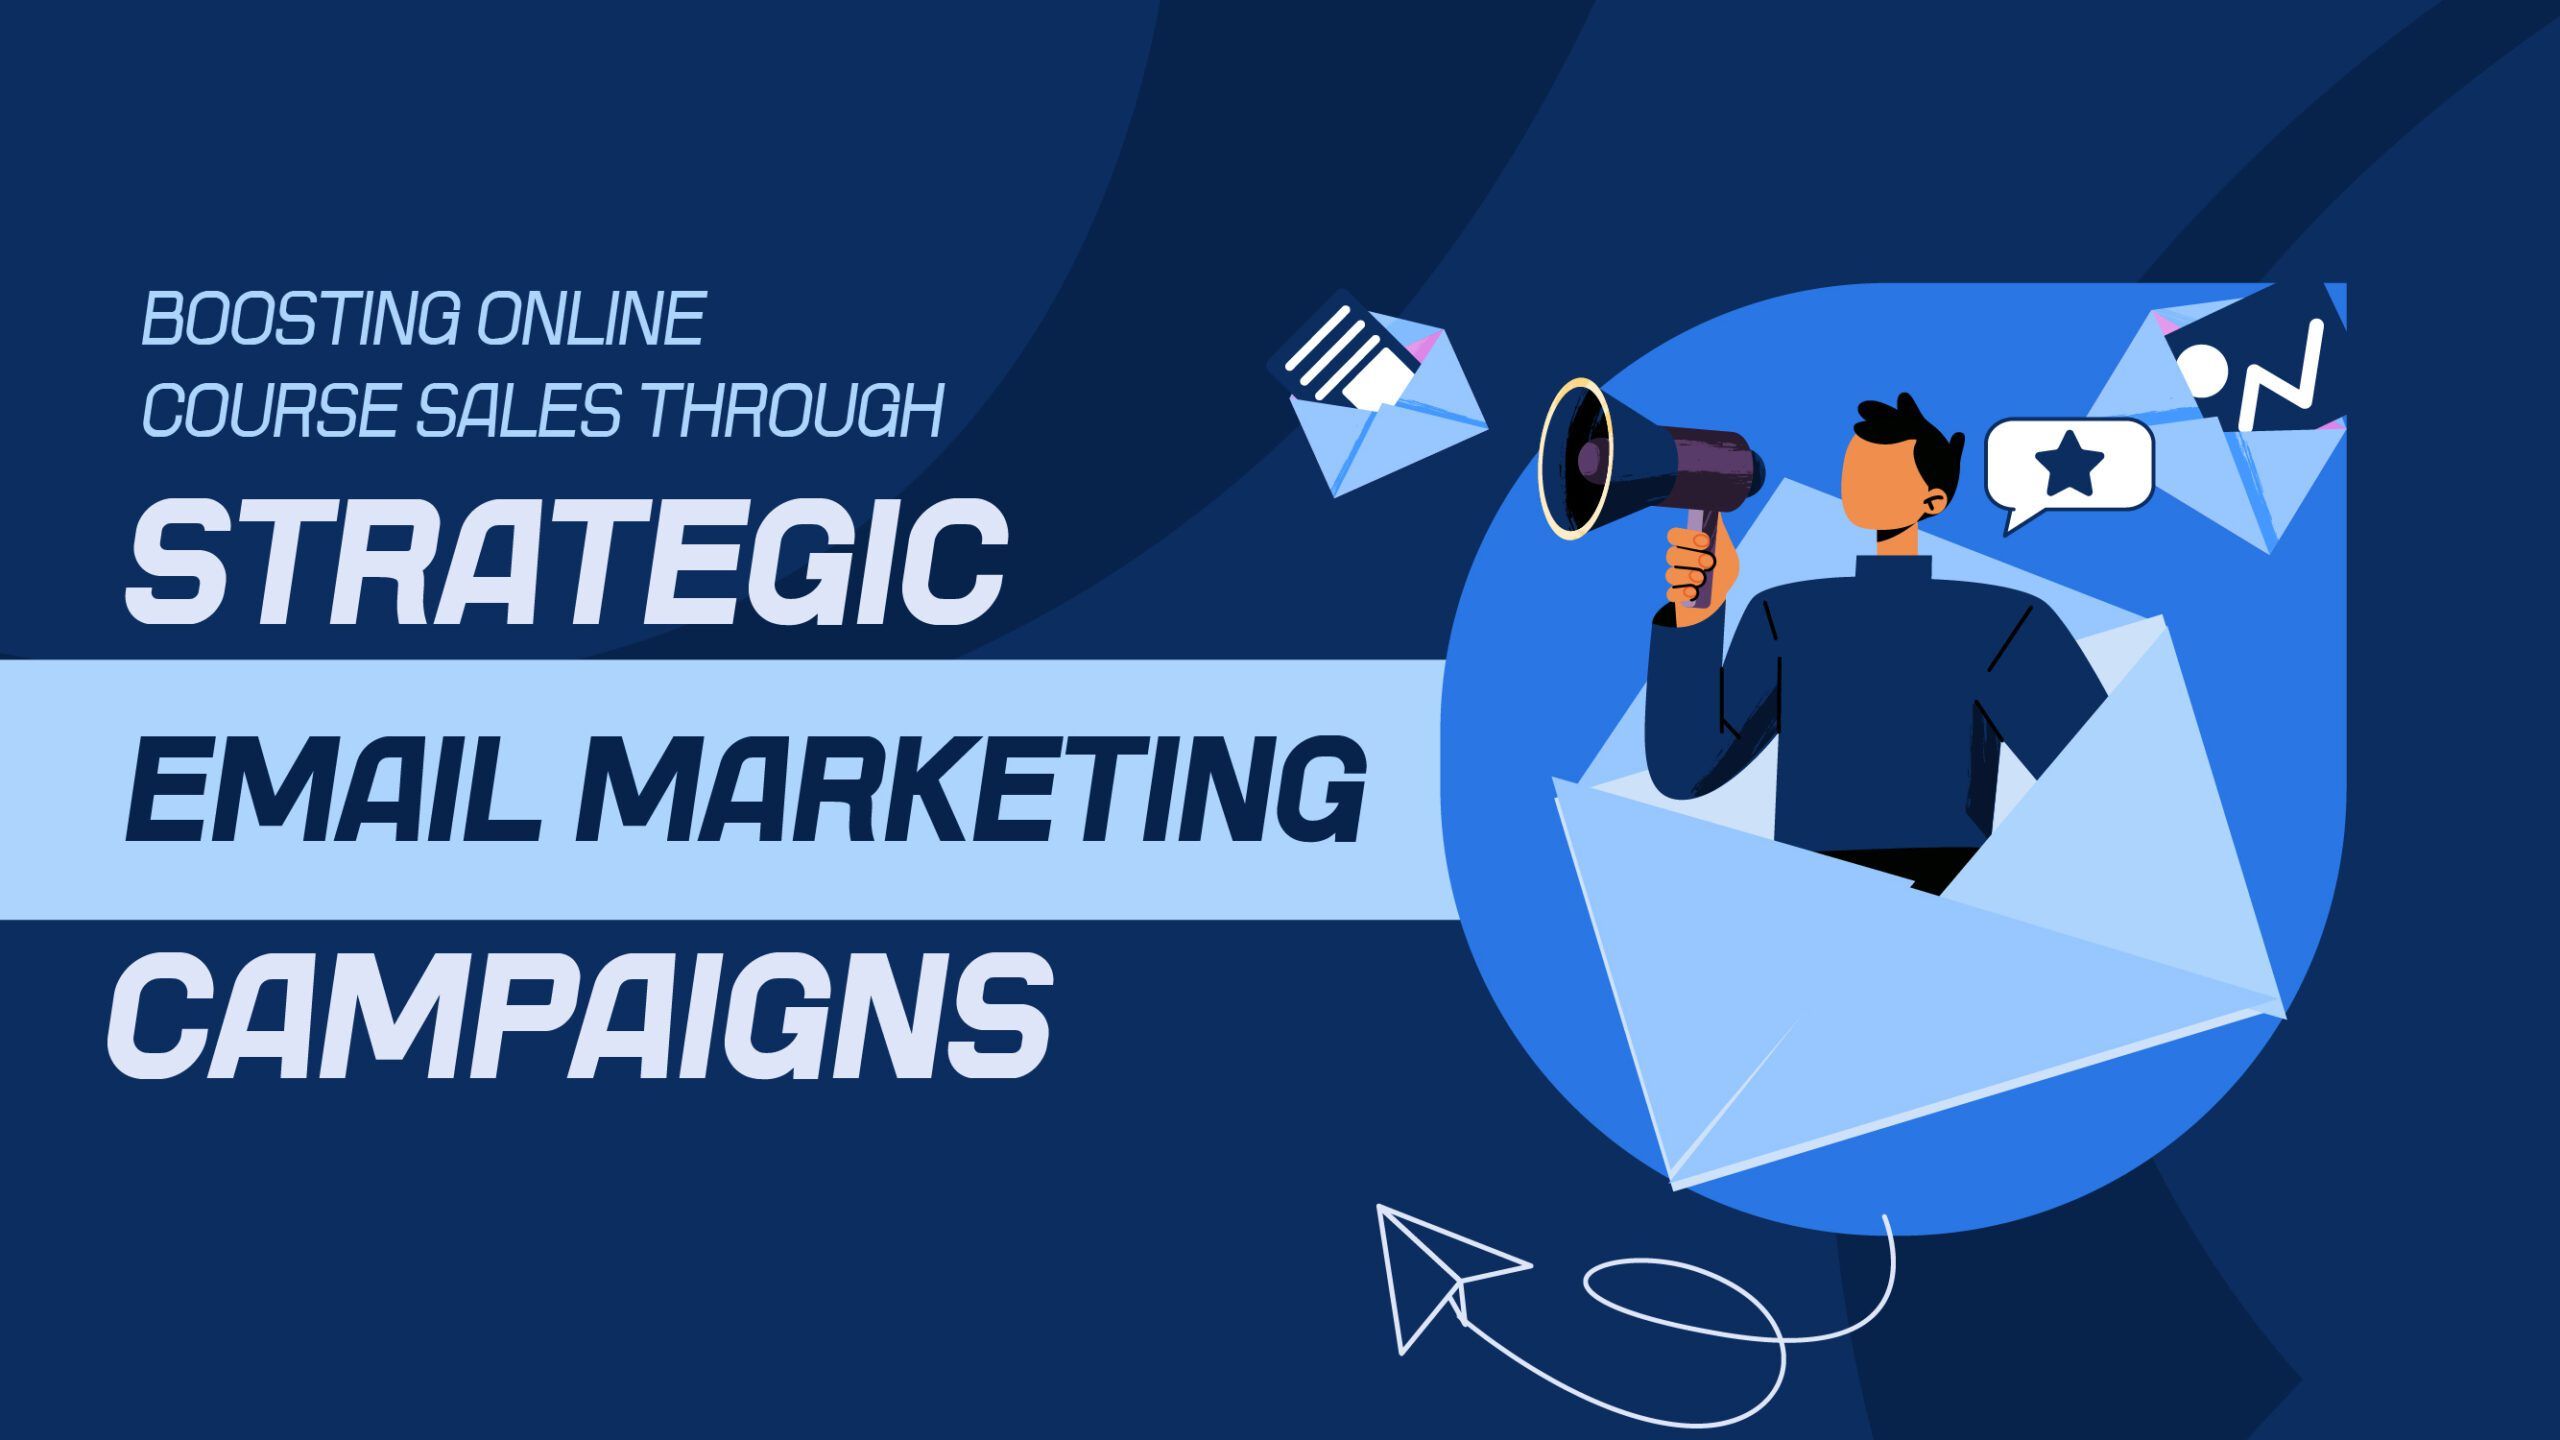 Boosting Online Course Sales Through Strategic Email Marketing Campaigns